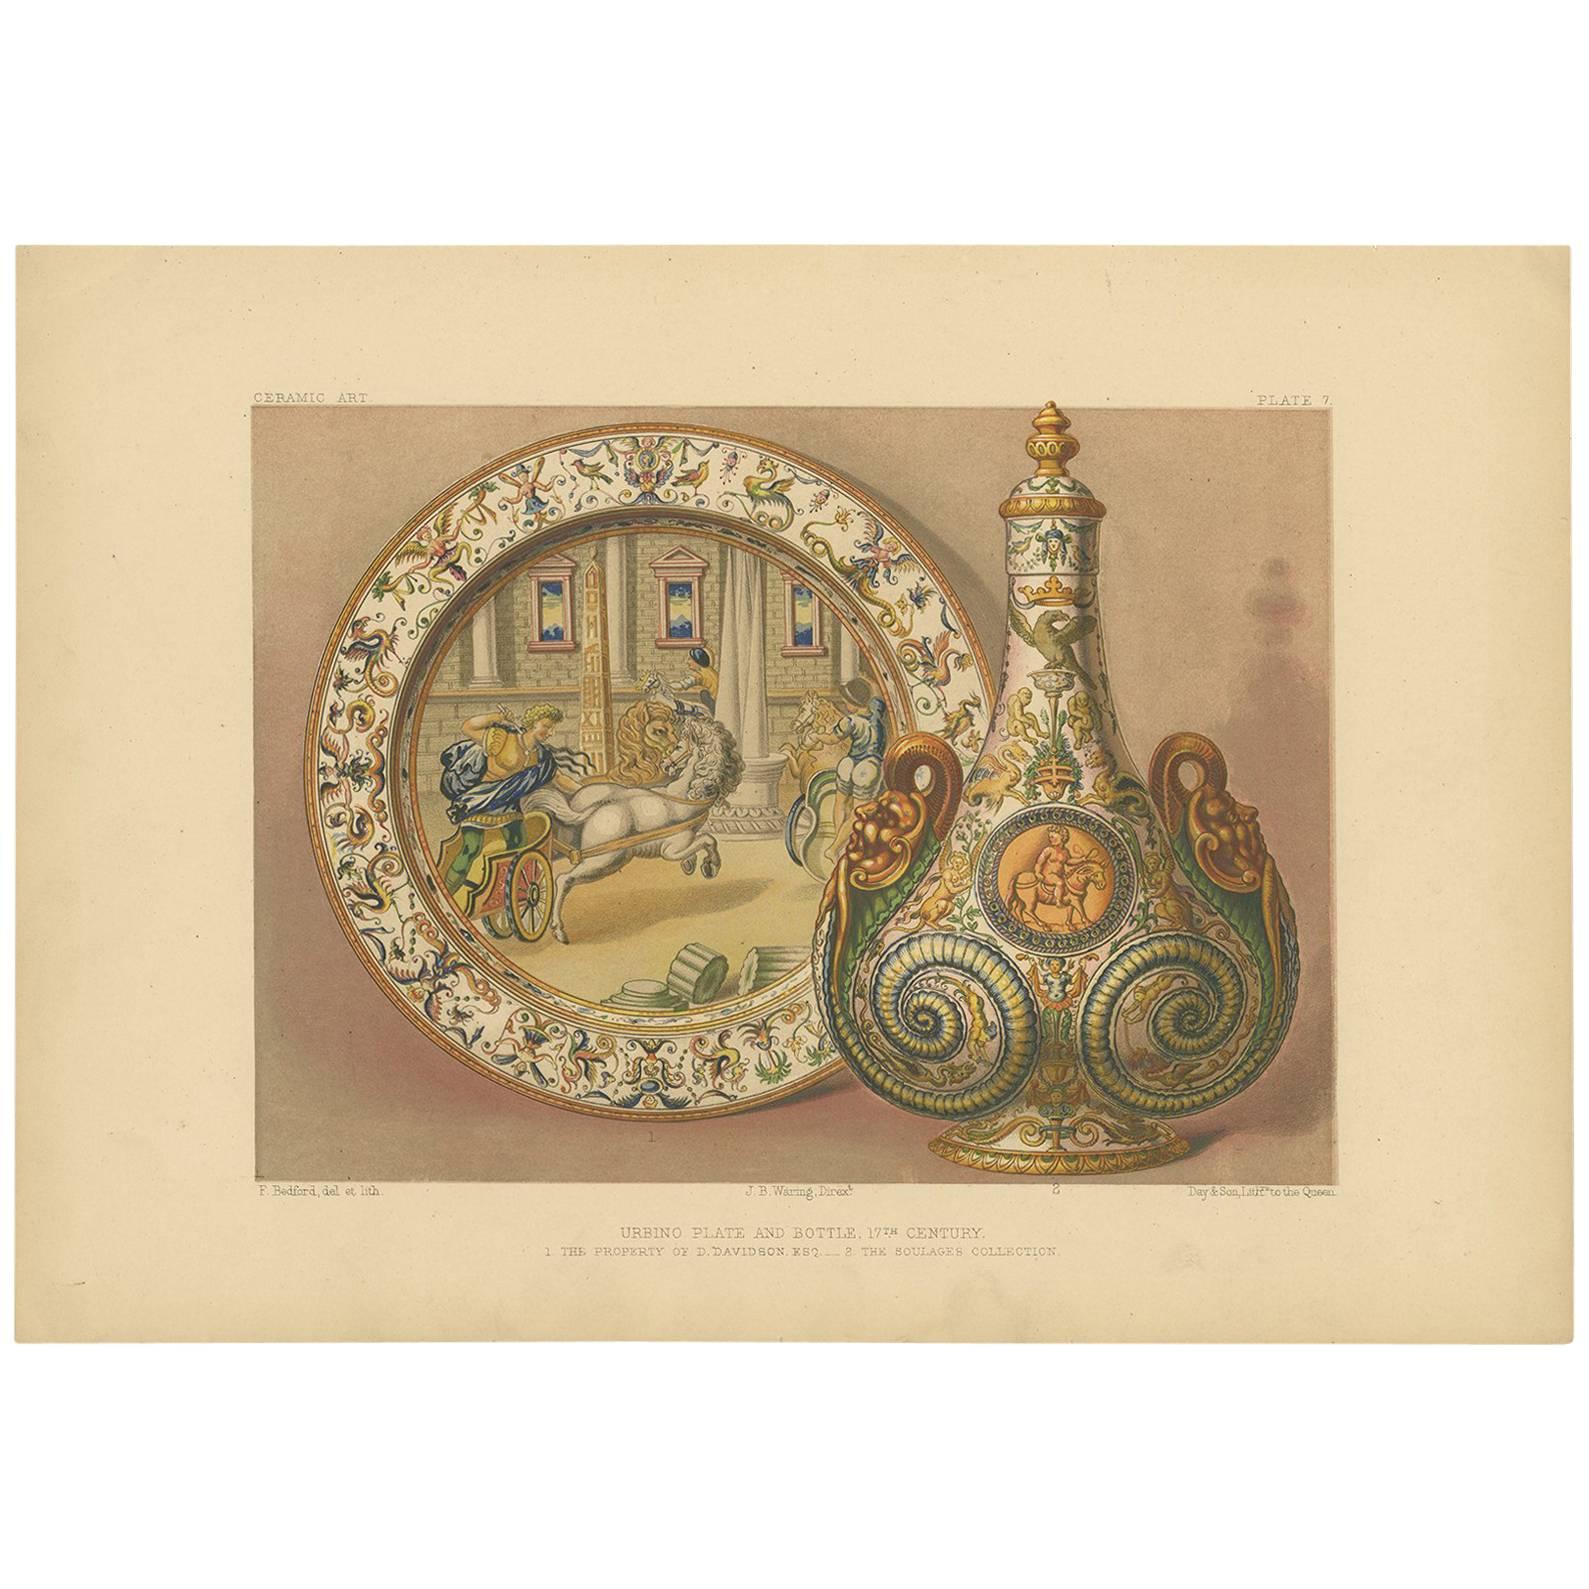 Pl. 7 Antique Print of an Urbino Ceramic Plate and Bottle by Bedford, circa 1857